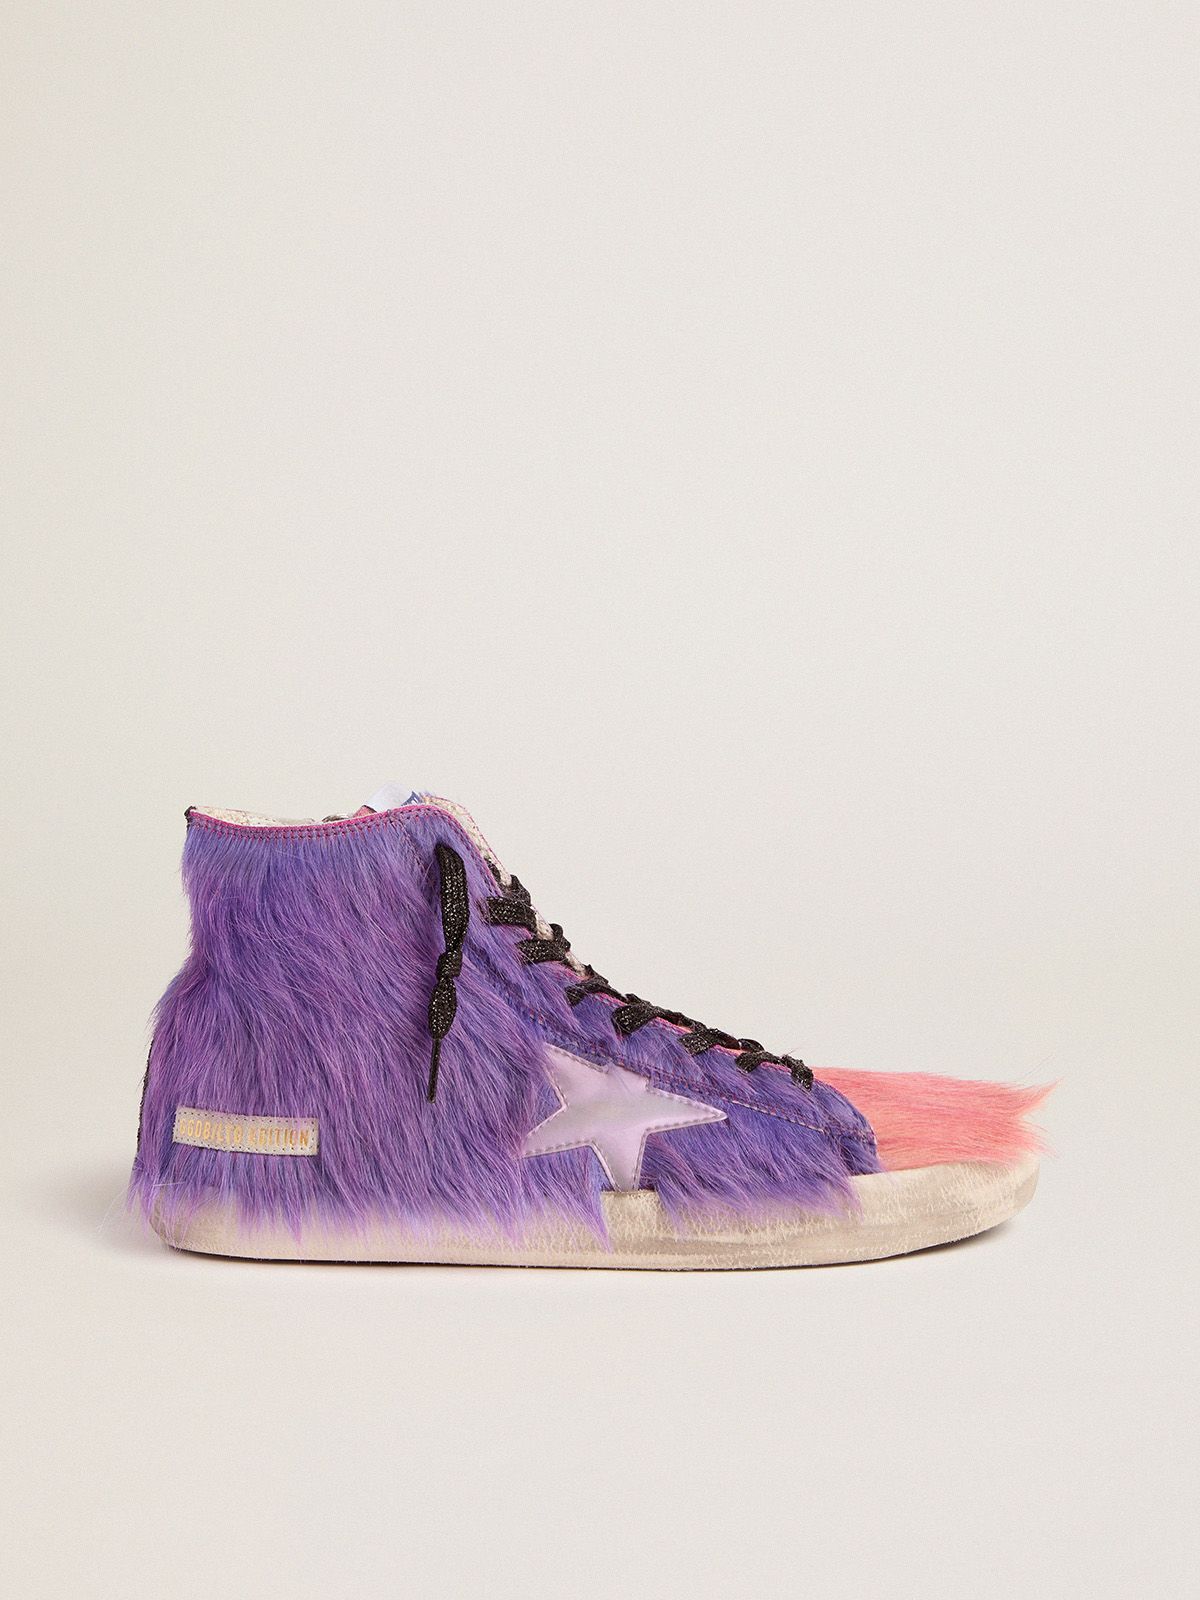 Sneakers Donna Golden Goose Men’s Limited Edition lilac and pink pony skin Francy sneakers